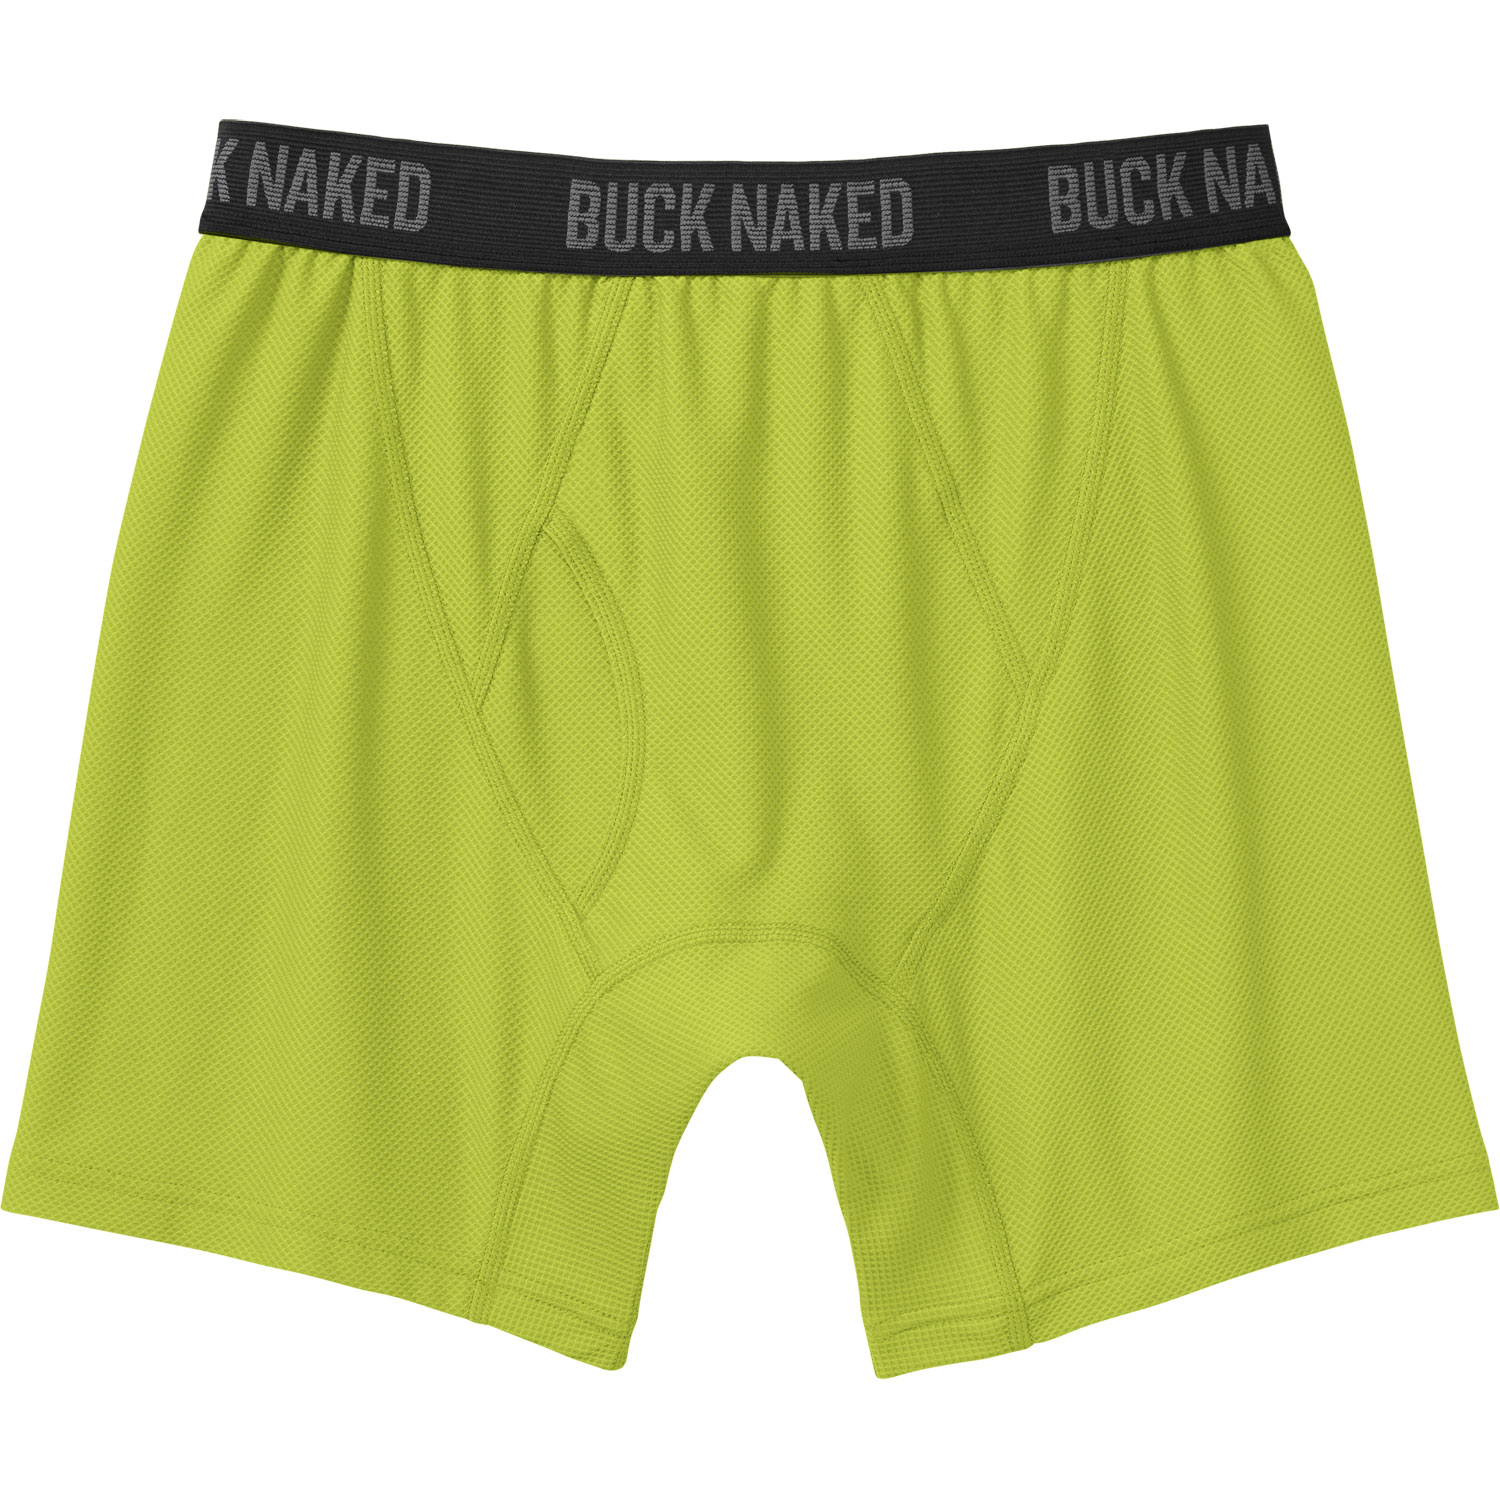 Duluth Trading Company - Go Buck Naked without going broke: this Thursday  and Friday only, get a pair of our Men's Buck Naked Underwear for just $16.  Regularly priced at $22.50. Plus